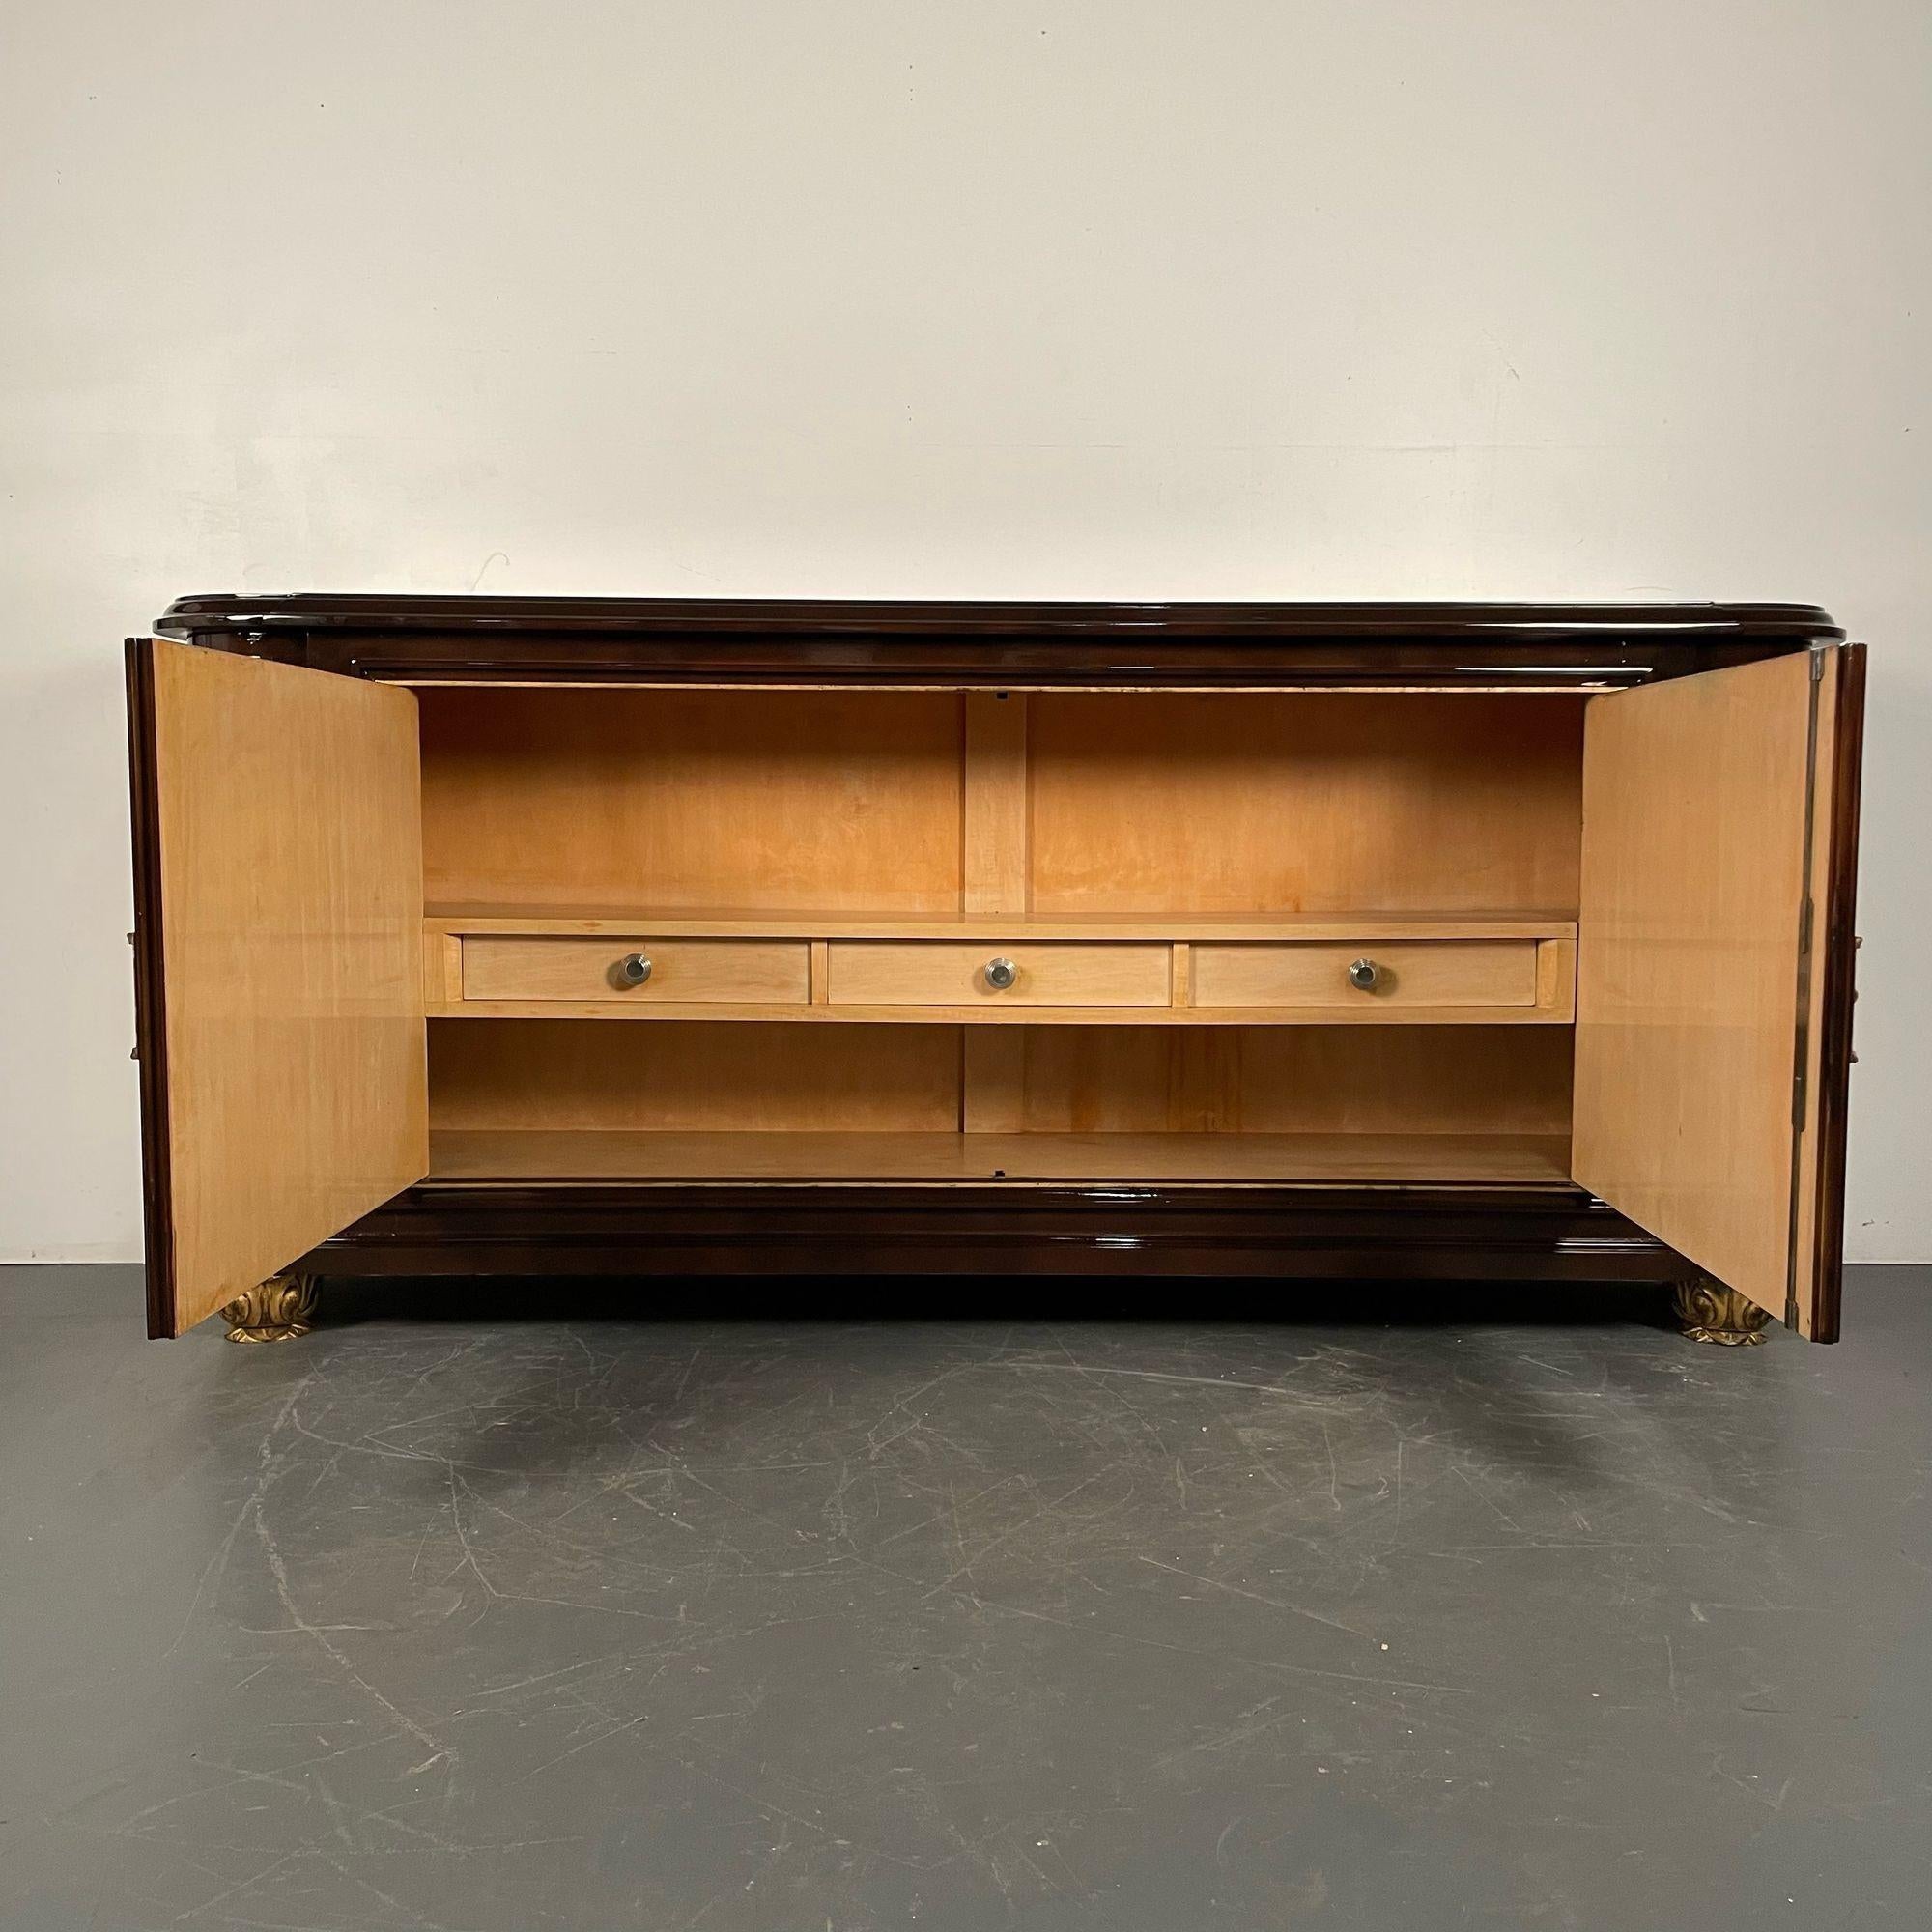 Giltwood Rene Drouet, French Art Deco, Sideboard, Brown Lacquer, Gilt, France, 1940s For Sale